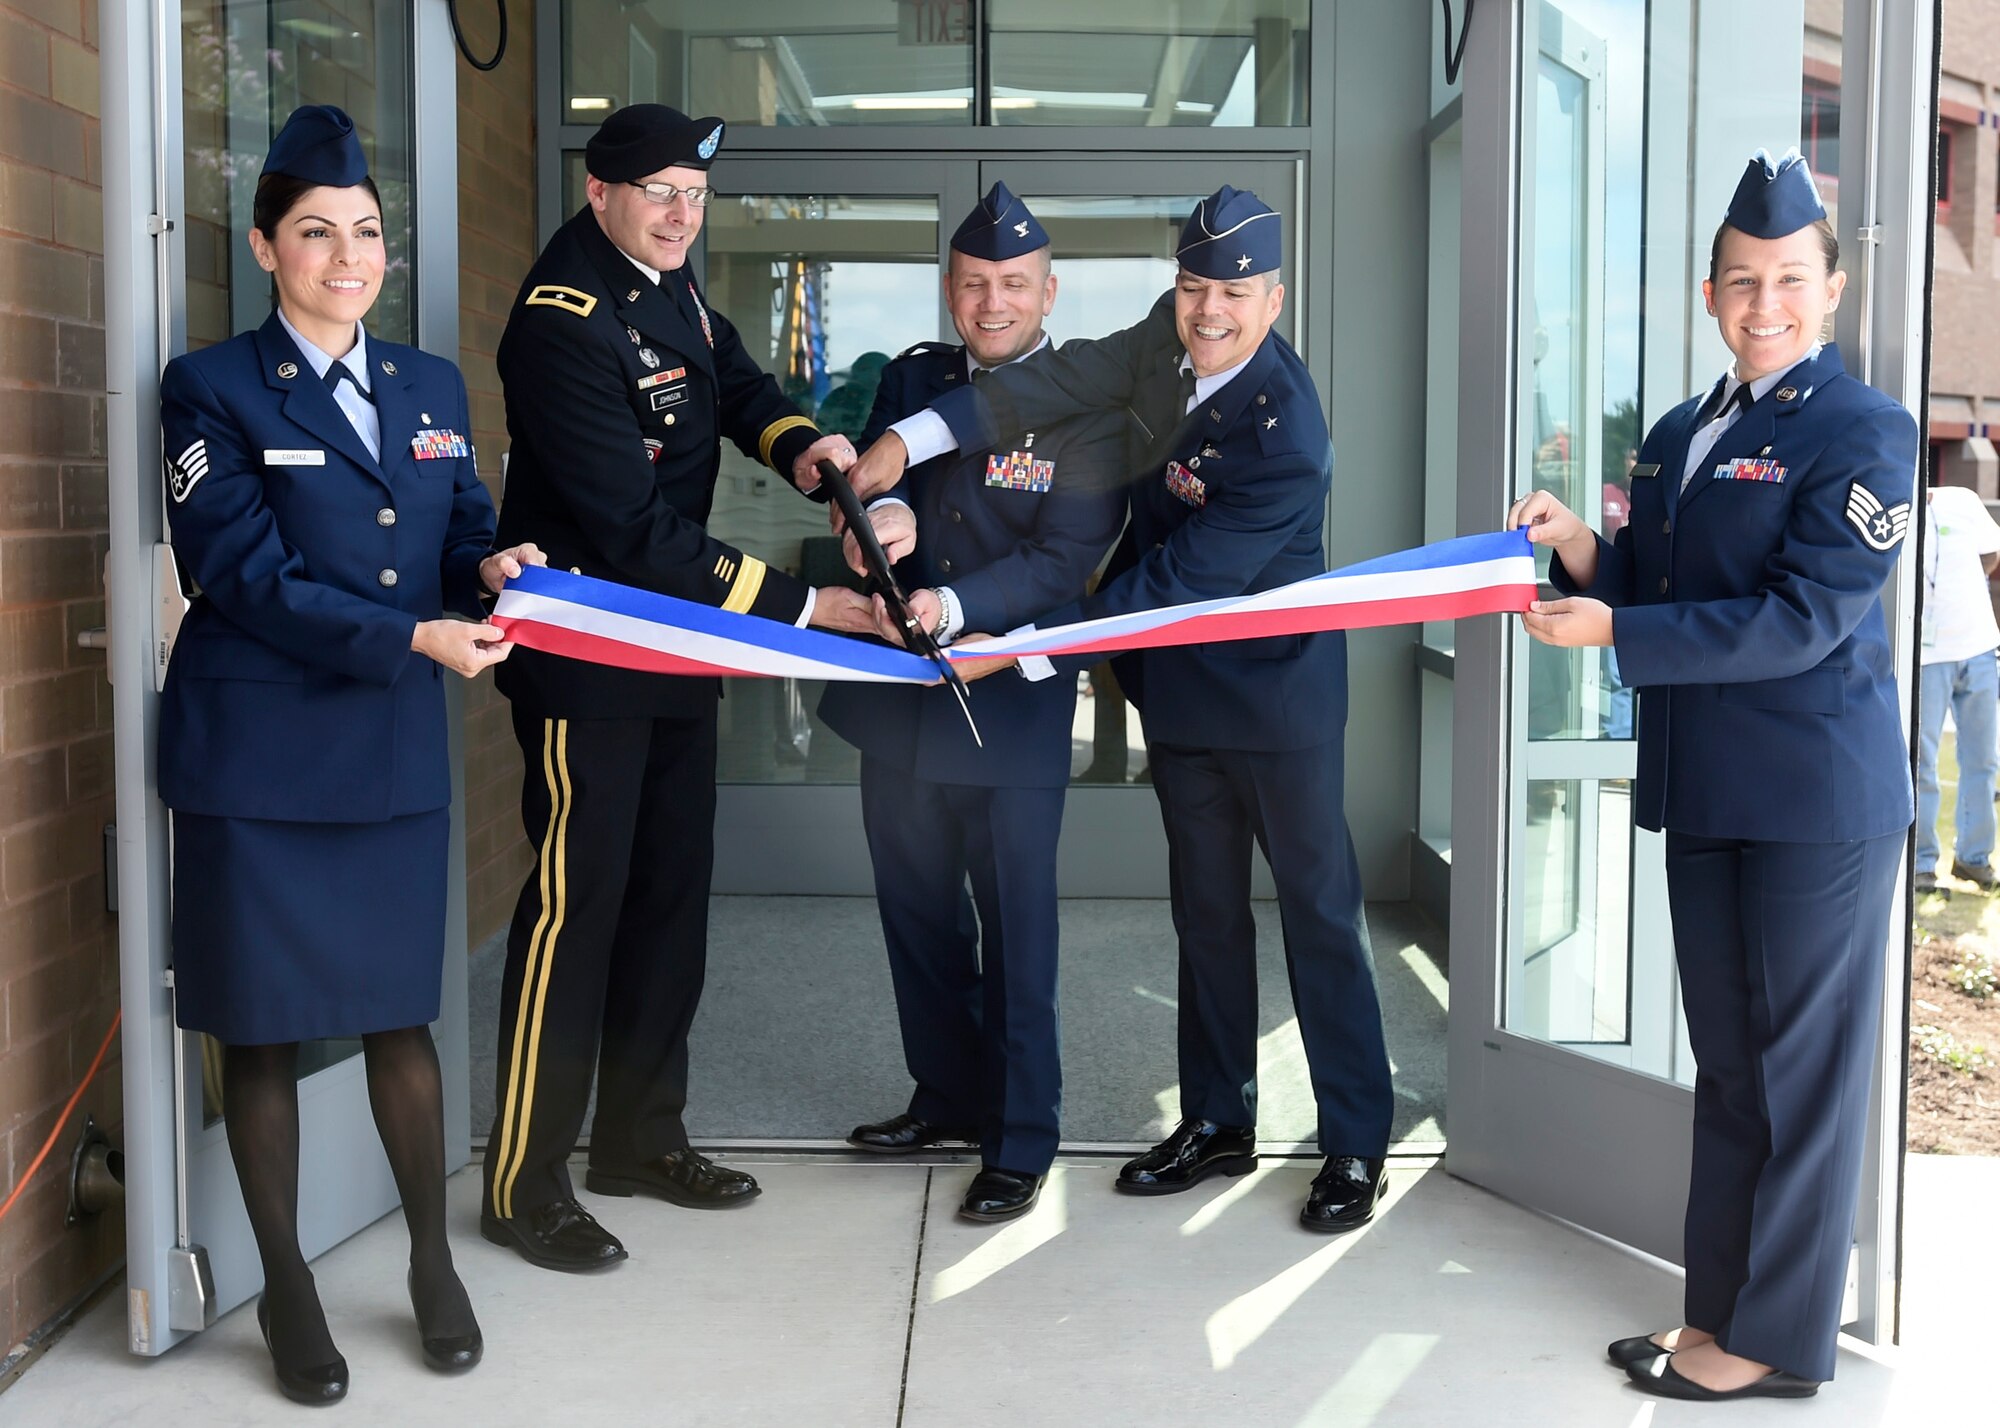 From left to right, Brig. Gen. Jeffrey Johnson, Col. Michael Richards and Brig. Gen. John DeGoes cuts the ribbon to officially open the undersea and hyperbaric medicine clinic, June 16, at the San Antonio Military Medical Center on Joint Base San Antonio-Fort Sam Houston, Texas. The hyperbaric medicine provides treatment for wound care, decompression sickness, arterial gas embolisms, carbon monoxide poisoning and provides the only active duty hyperbaric fellowship program